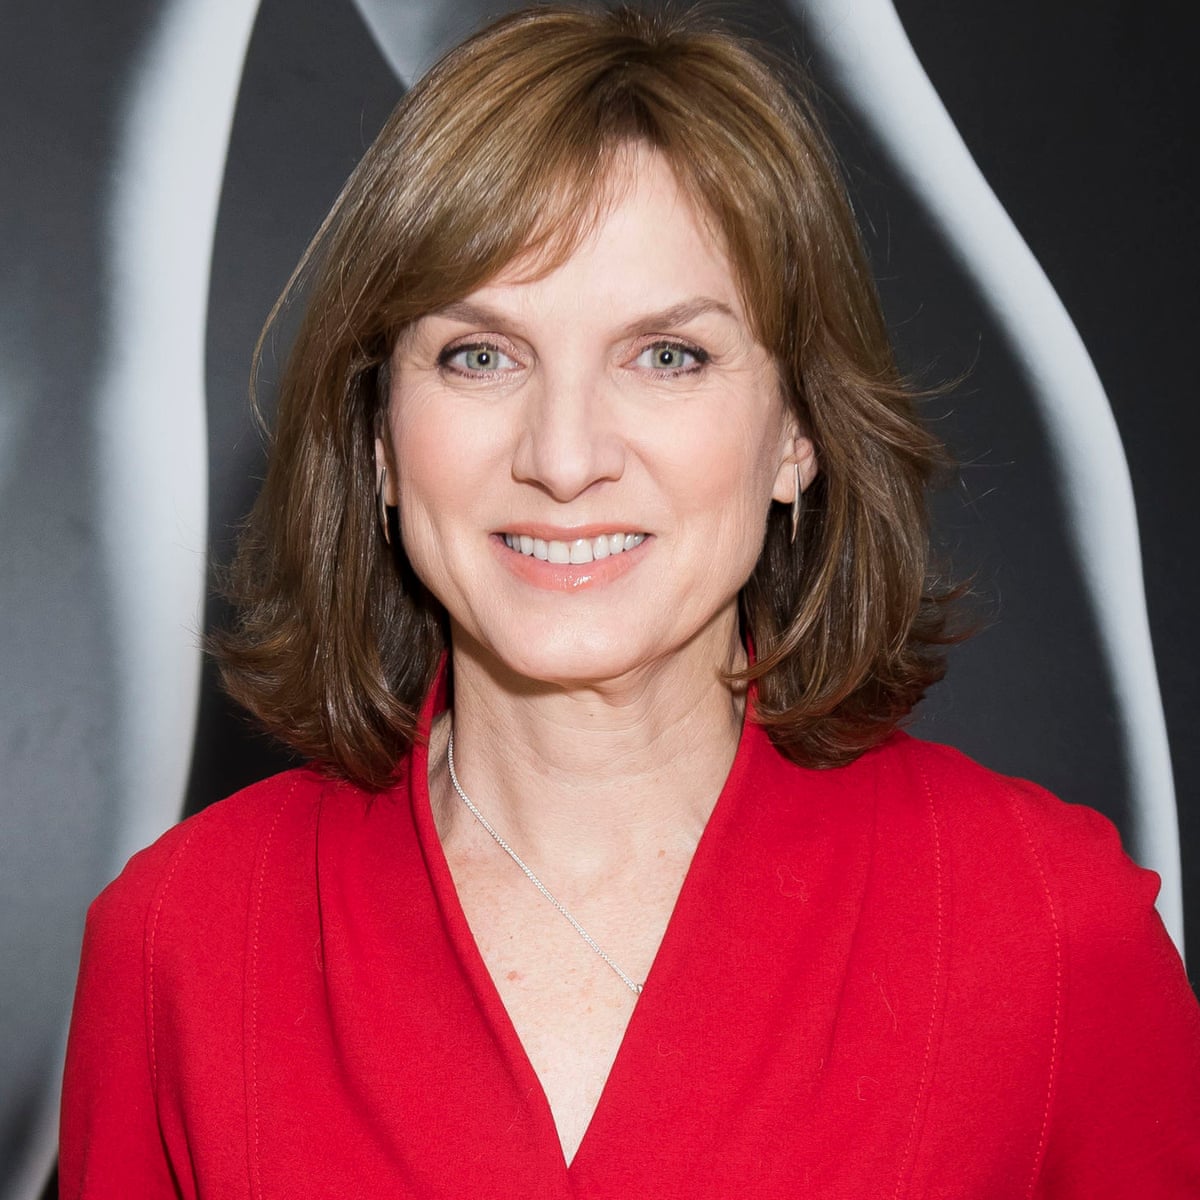 Fiona Bruce height, age, measurements, weight